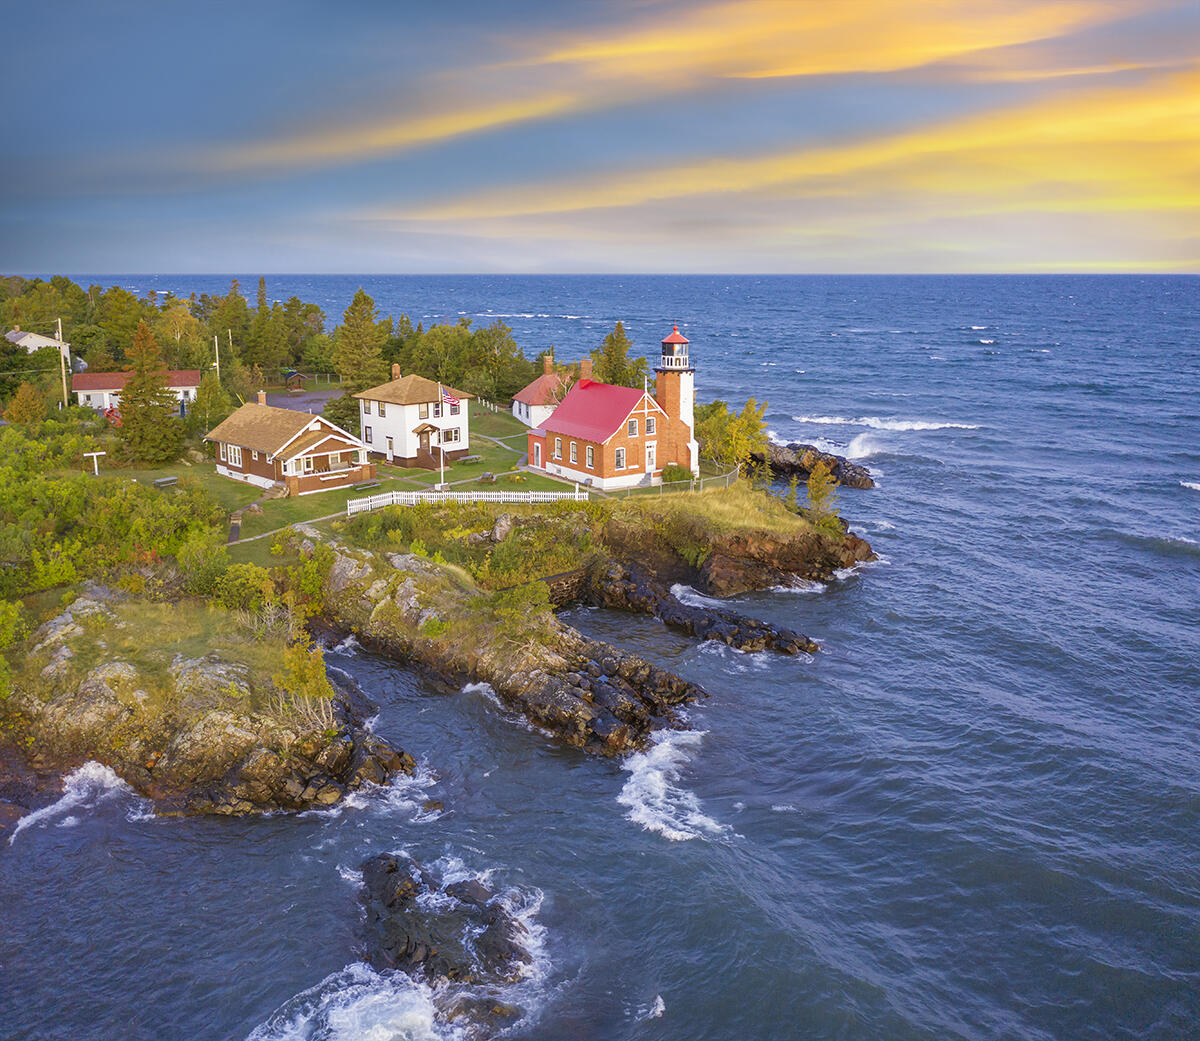 Michigan's Upper Peninsula, Eagle Harbor Lighthouse. Remote outpost at the Northern tip of the Keweenaw Peninsula in Lake Superior, amid windy autumn dawn.